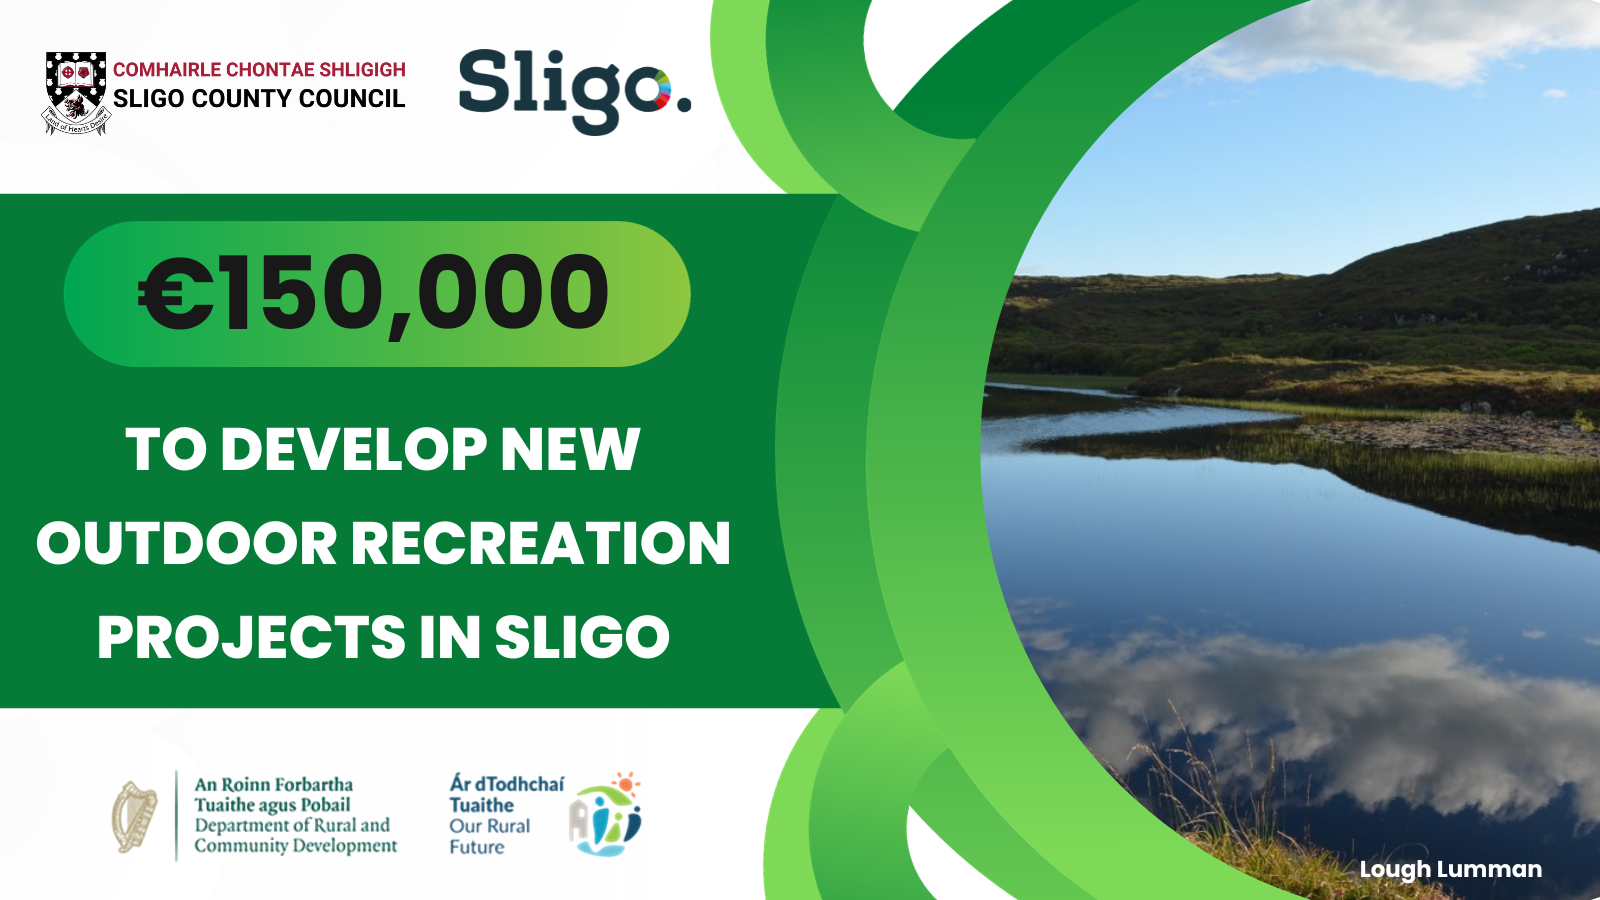 €150,000 announced to develop 50 new outdoor recreation projects in Sligo